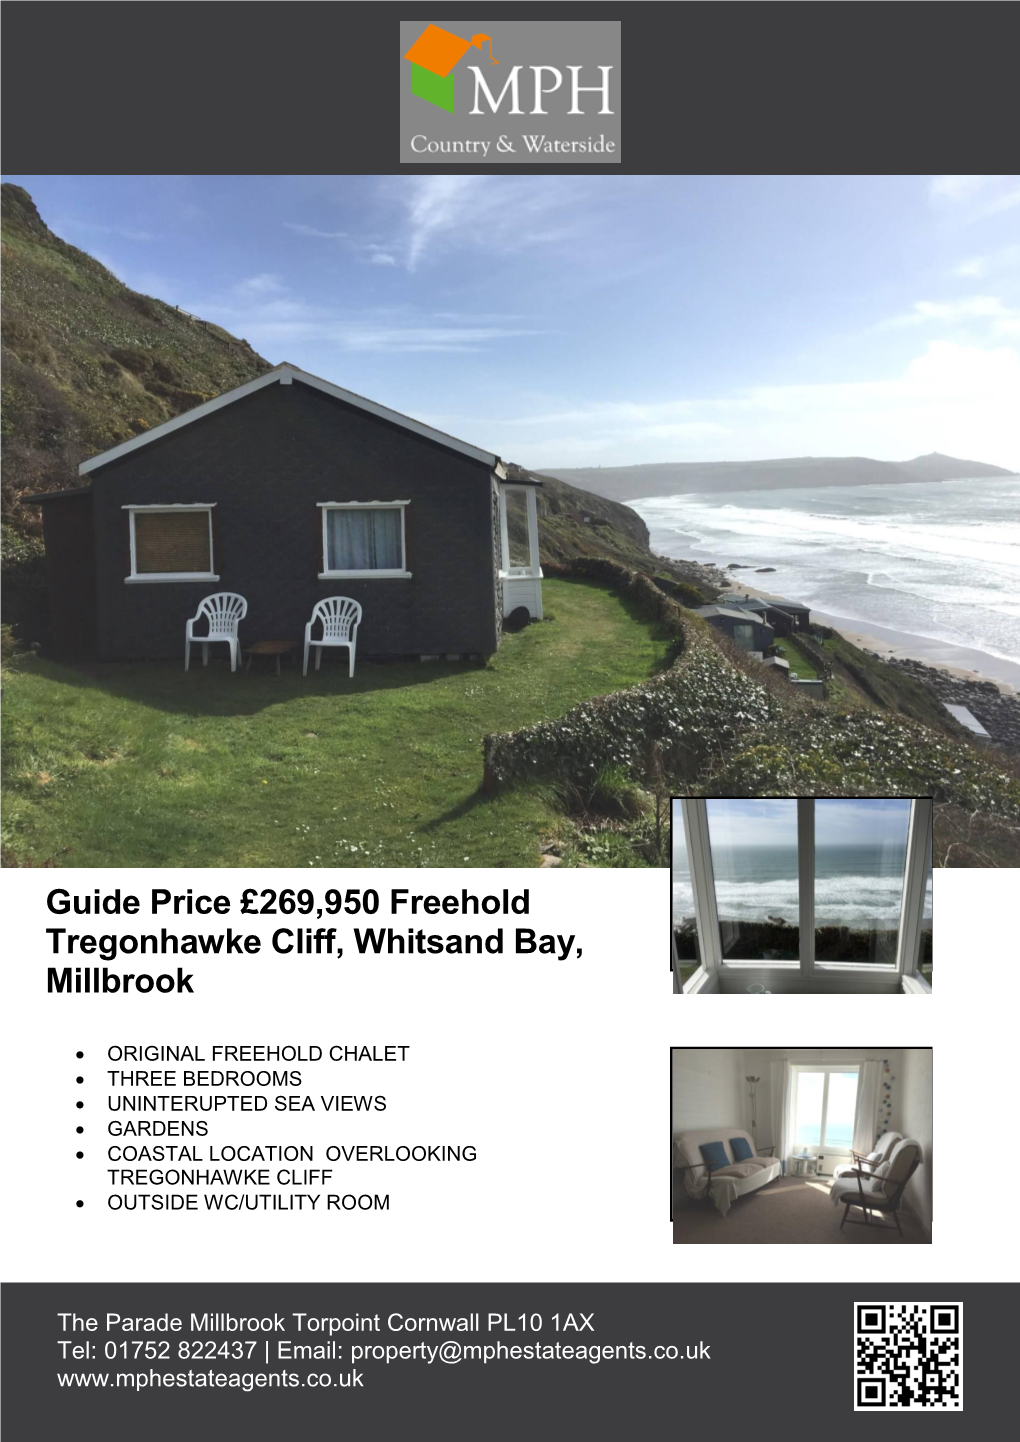 Guide Price £269,950 Freehold Tregonhawke Cliff, Whitsand Bay, Millbrook